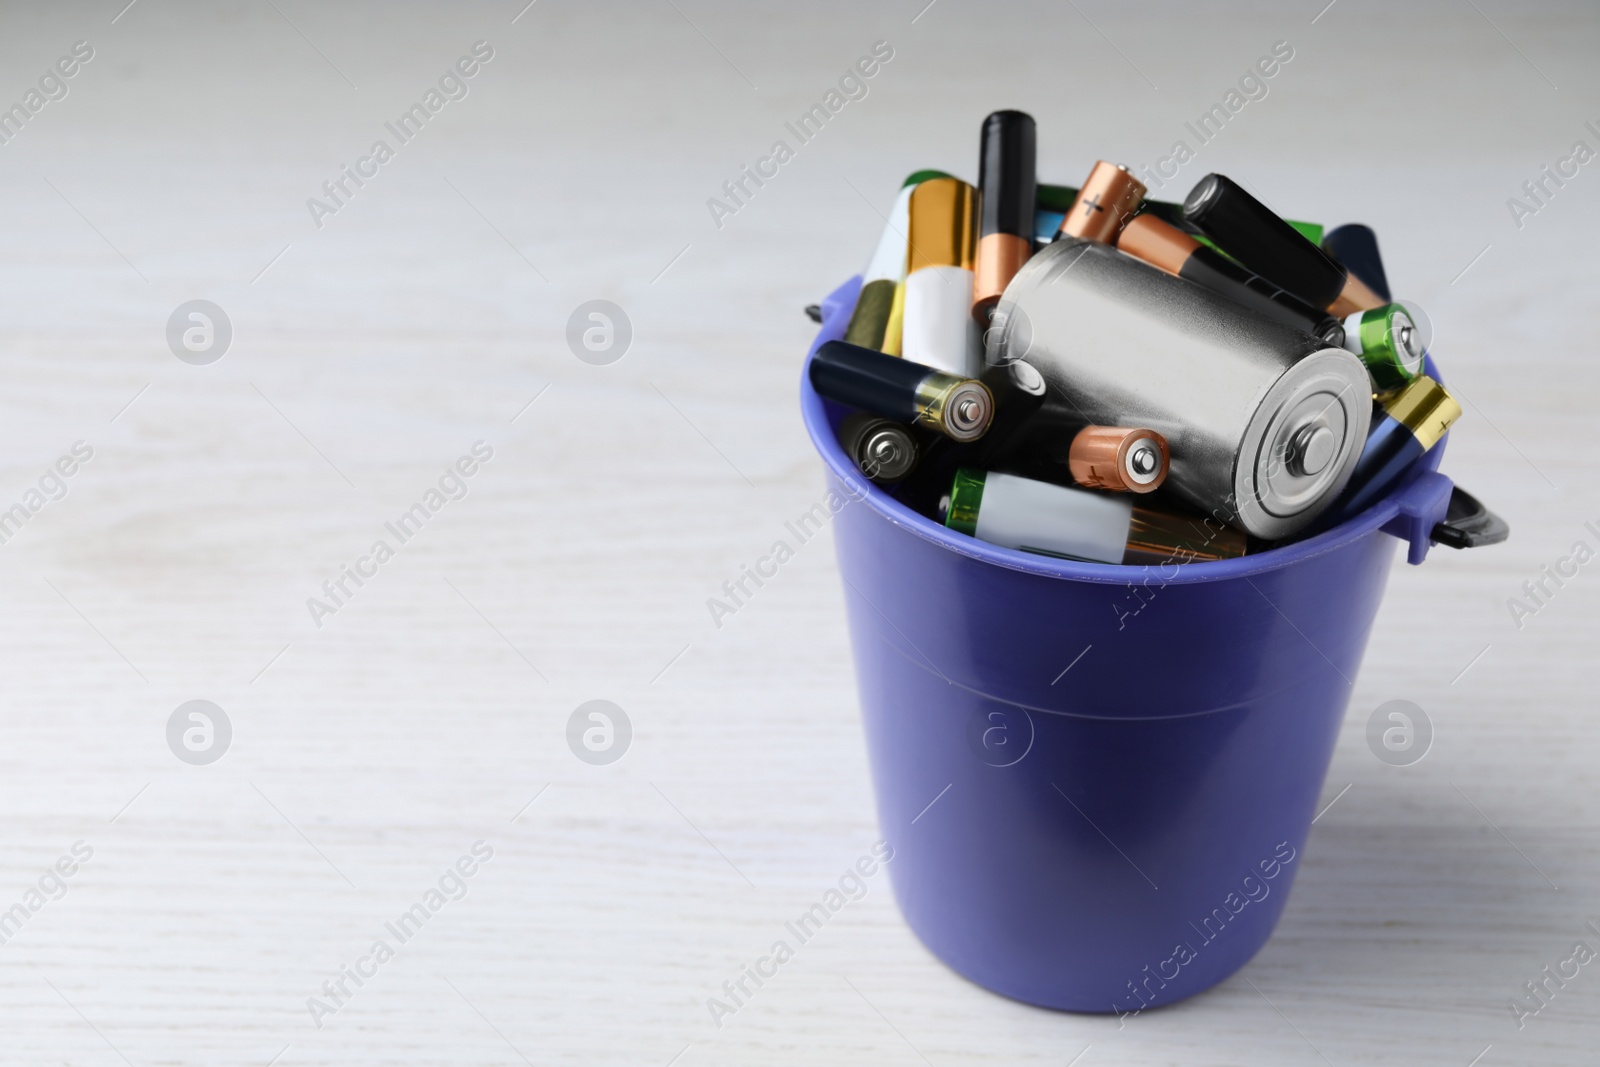 Image of Used batteries in bucket on white table, space for text